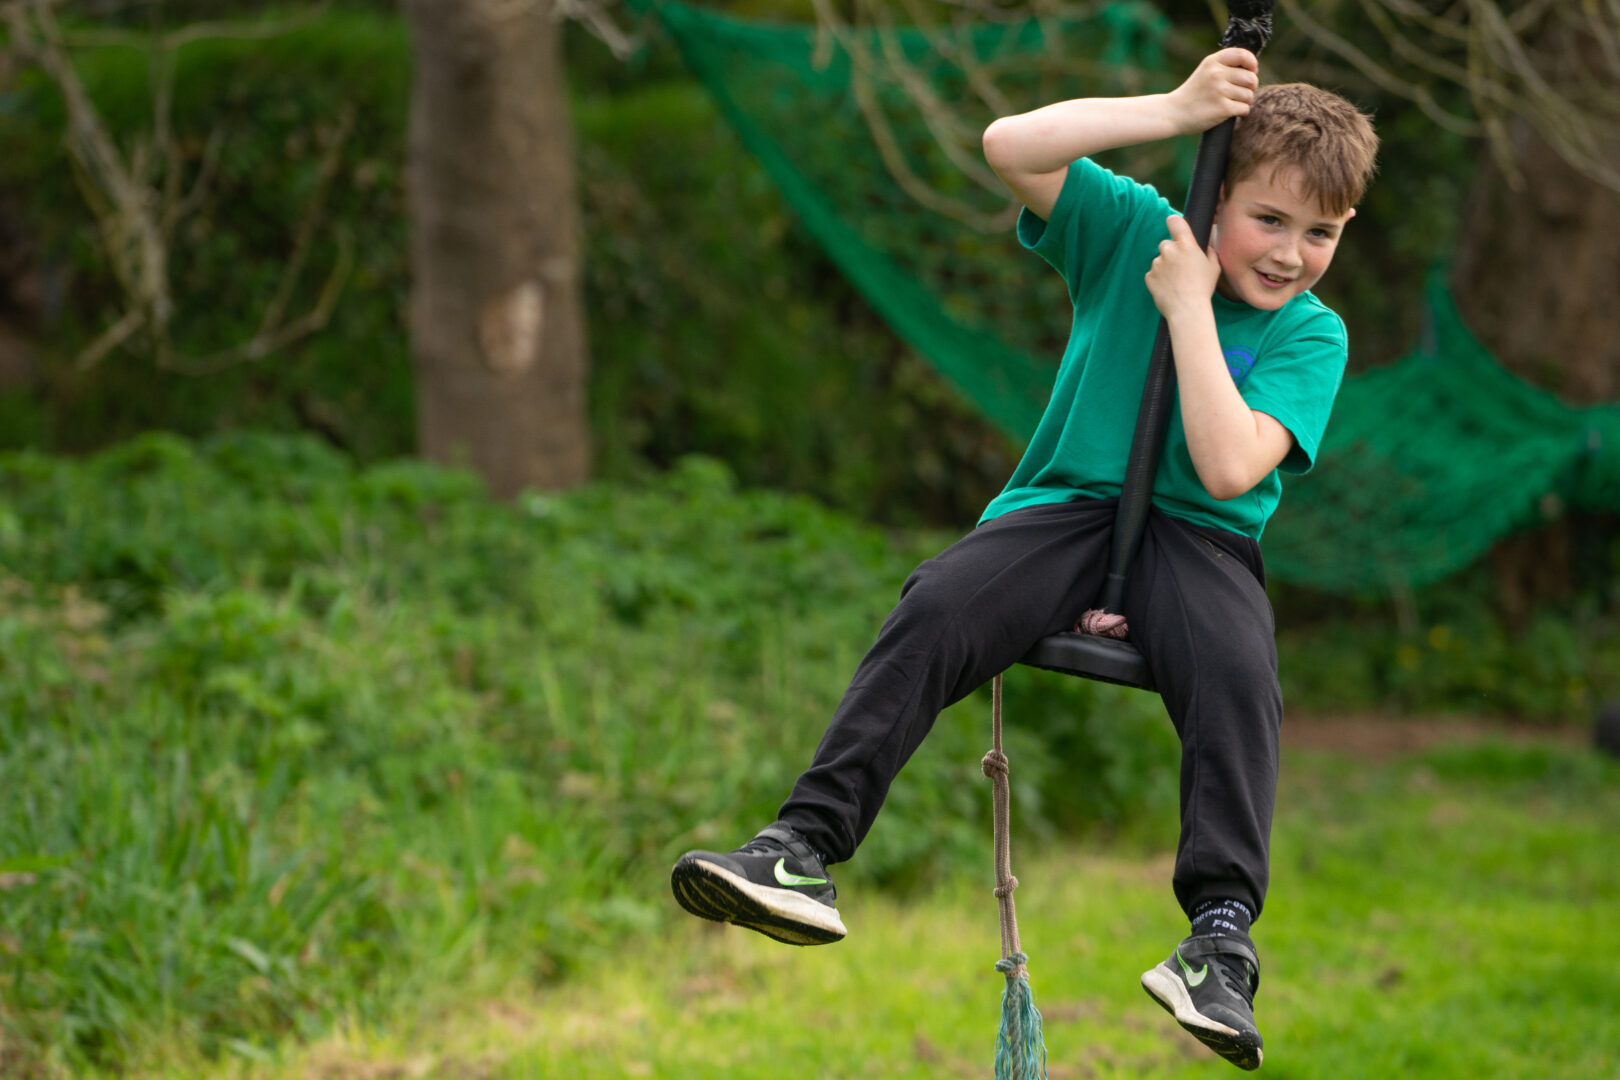 A young boy in a green t-shirt riding on a zip wire past green bushes and trees.